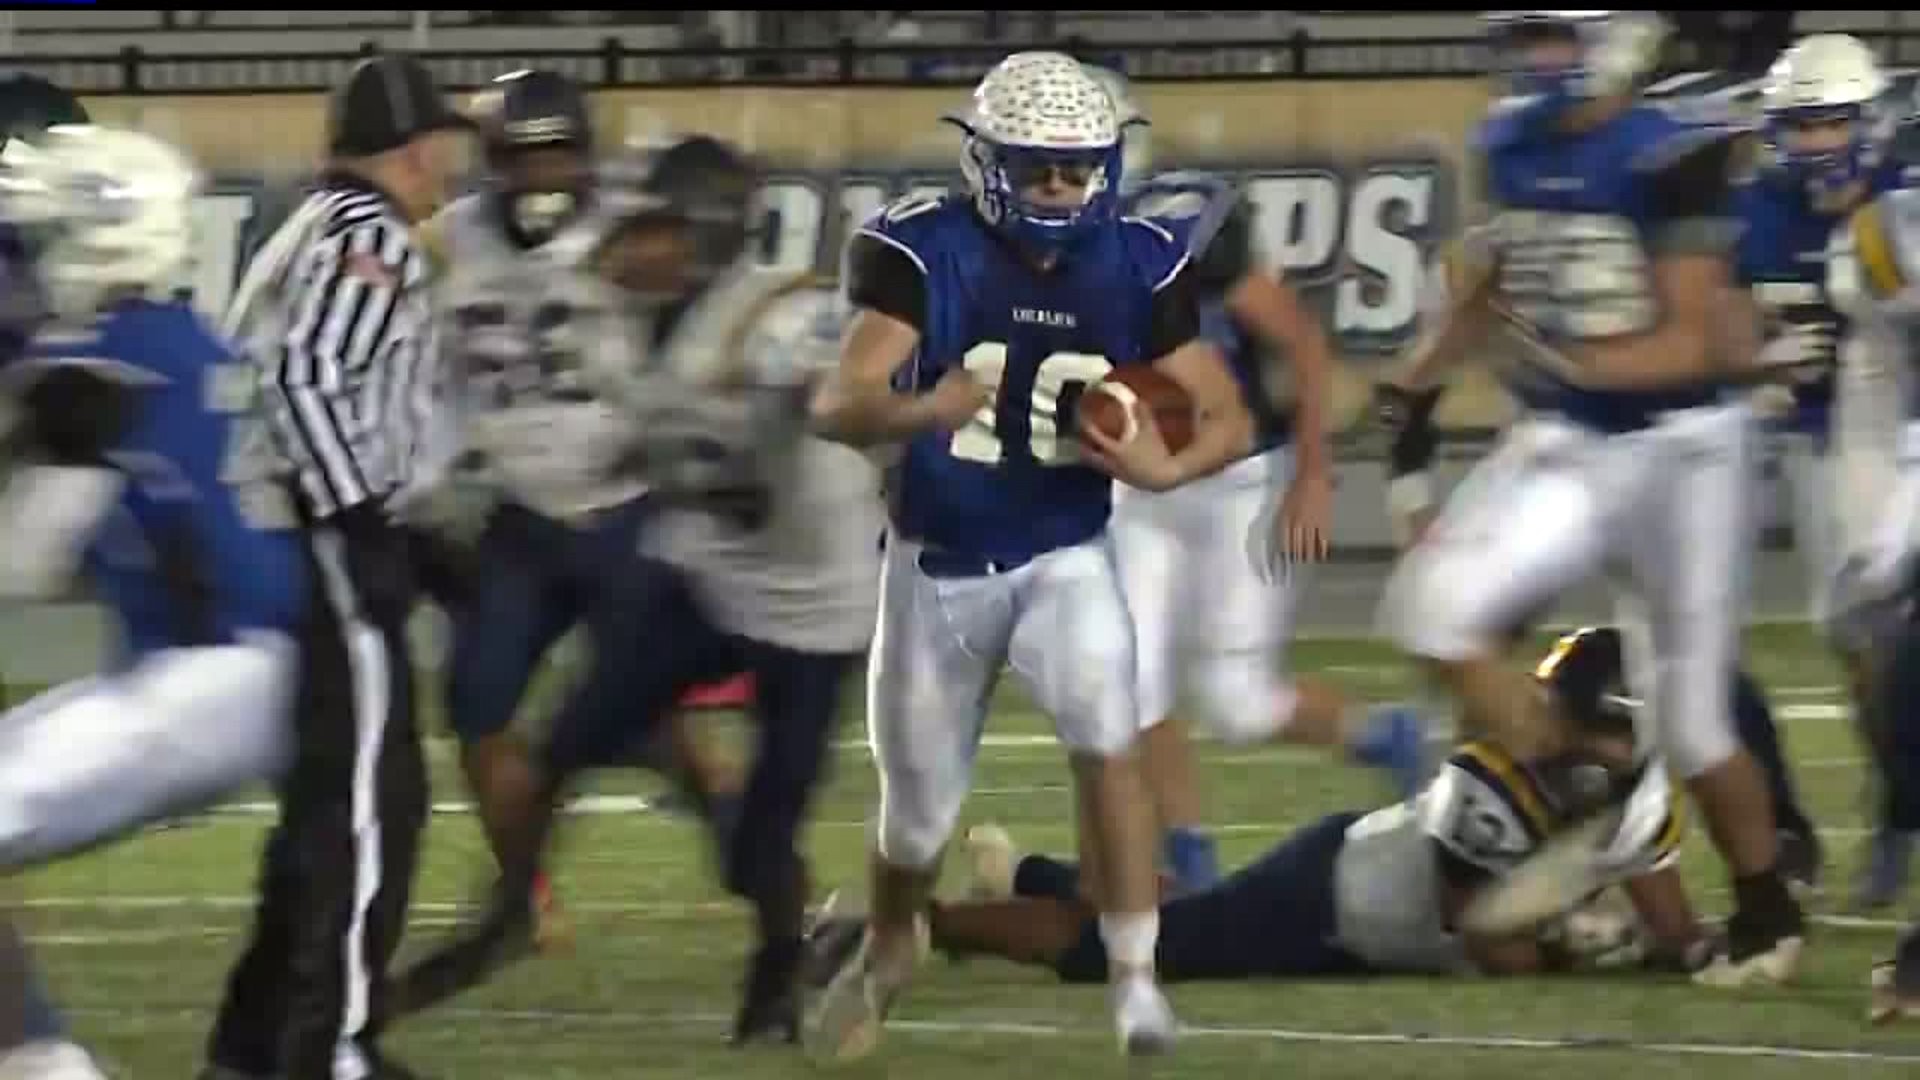 HSFF 2019 Cocalico falls short in PIAA 5A semifinals